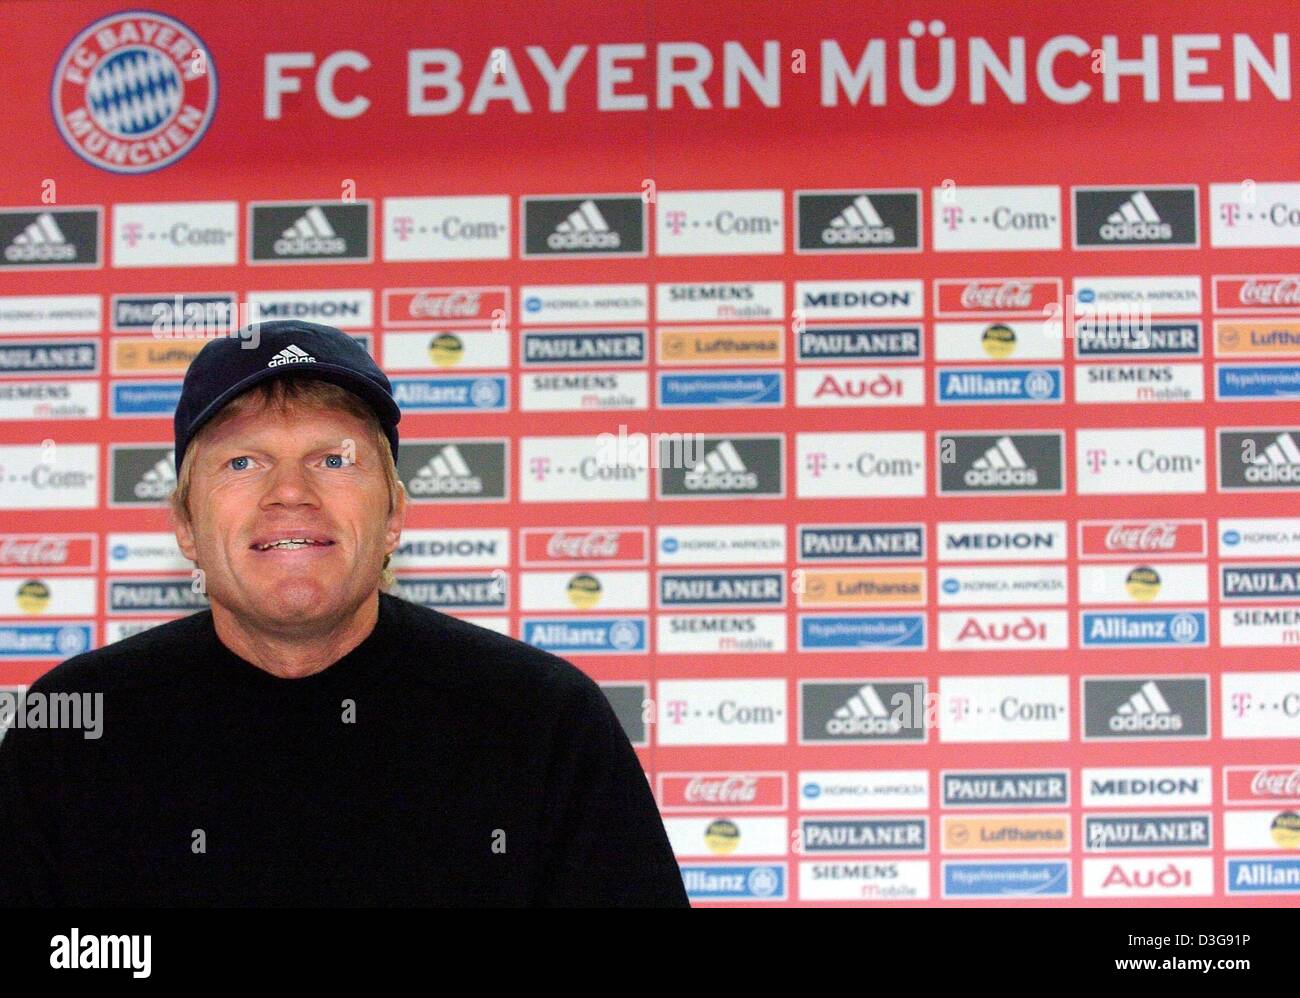 (dpa) - Oliver Kahn, goalkeeper of German Bundesliga side Bayern Munich, speaks to journalists during a press conference in Munich, Germany, 4 November 2004. A day earlier Kahn's goalkeeping gaffe had led to a last minute goal in Bayern's Champions League match against Italian side Juventus Turin which turned out to be the deciding goal in the team's 1-0 loss. Stock Photo